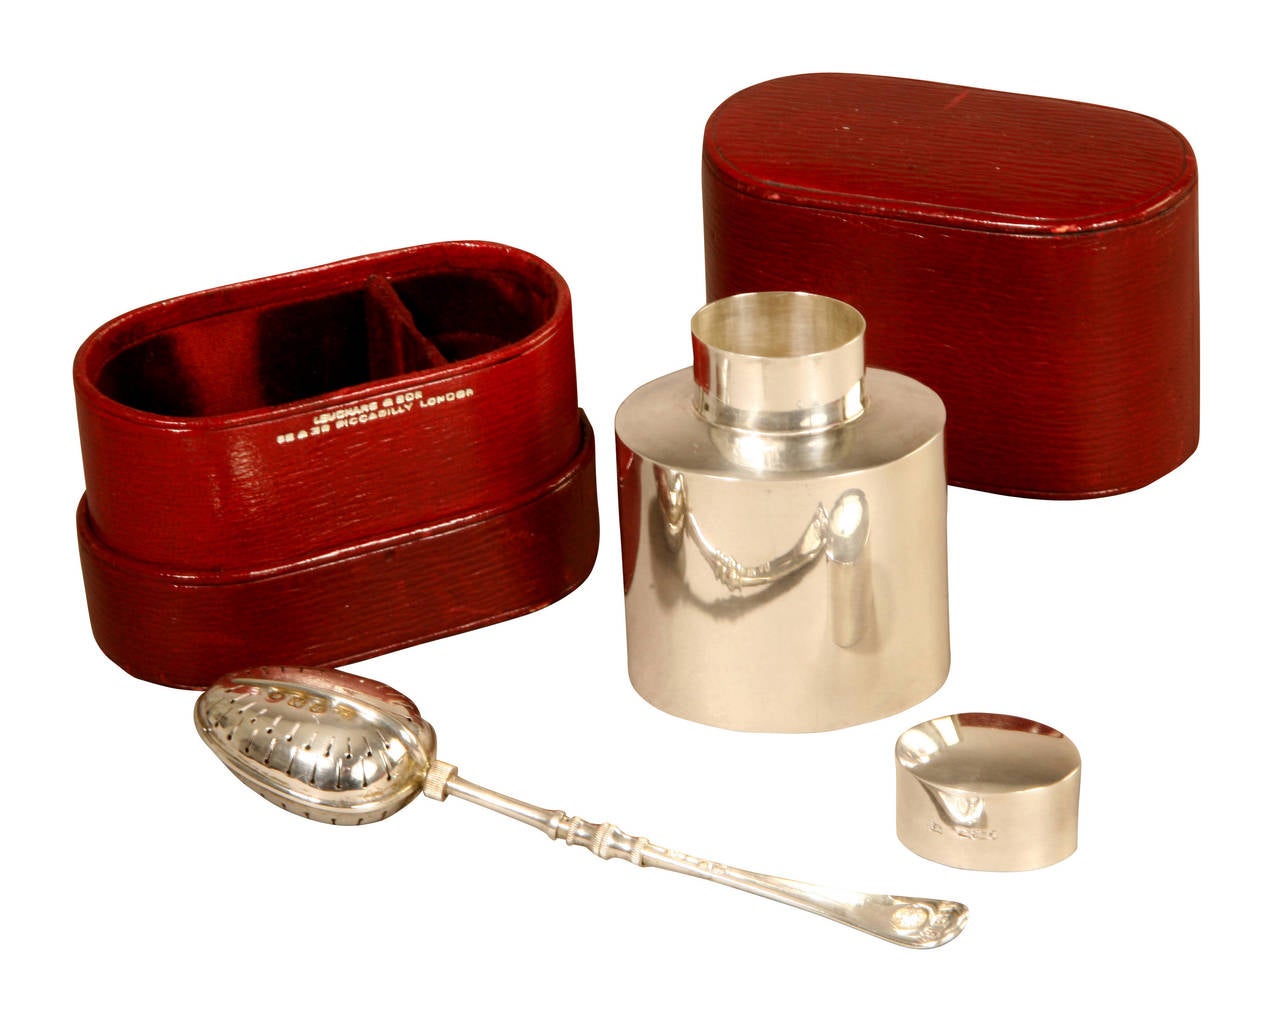 This silver Tea Caddy and Spoon Infuser fits neatly into a small red leather case which is stamped in silver with Leuchars & Son, 38 & 39 Piccadilly London. The Caddy is hallmarked for the Sheffield silversmith Harry Atkin, 1892 and the Infuser for